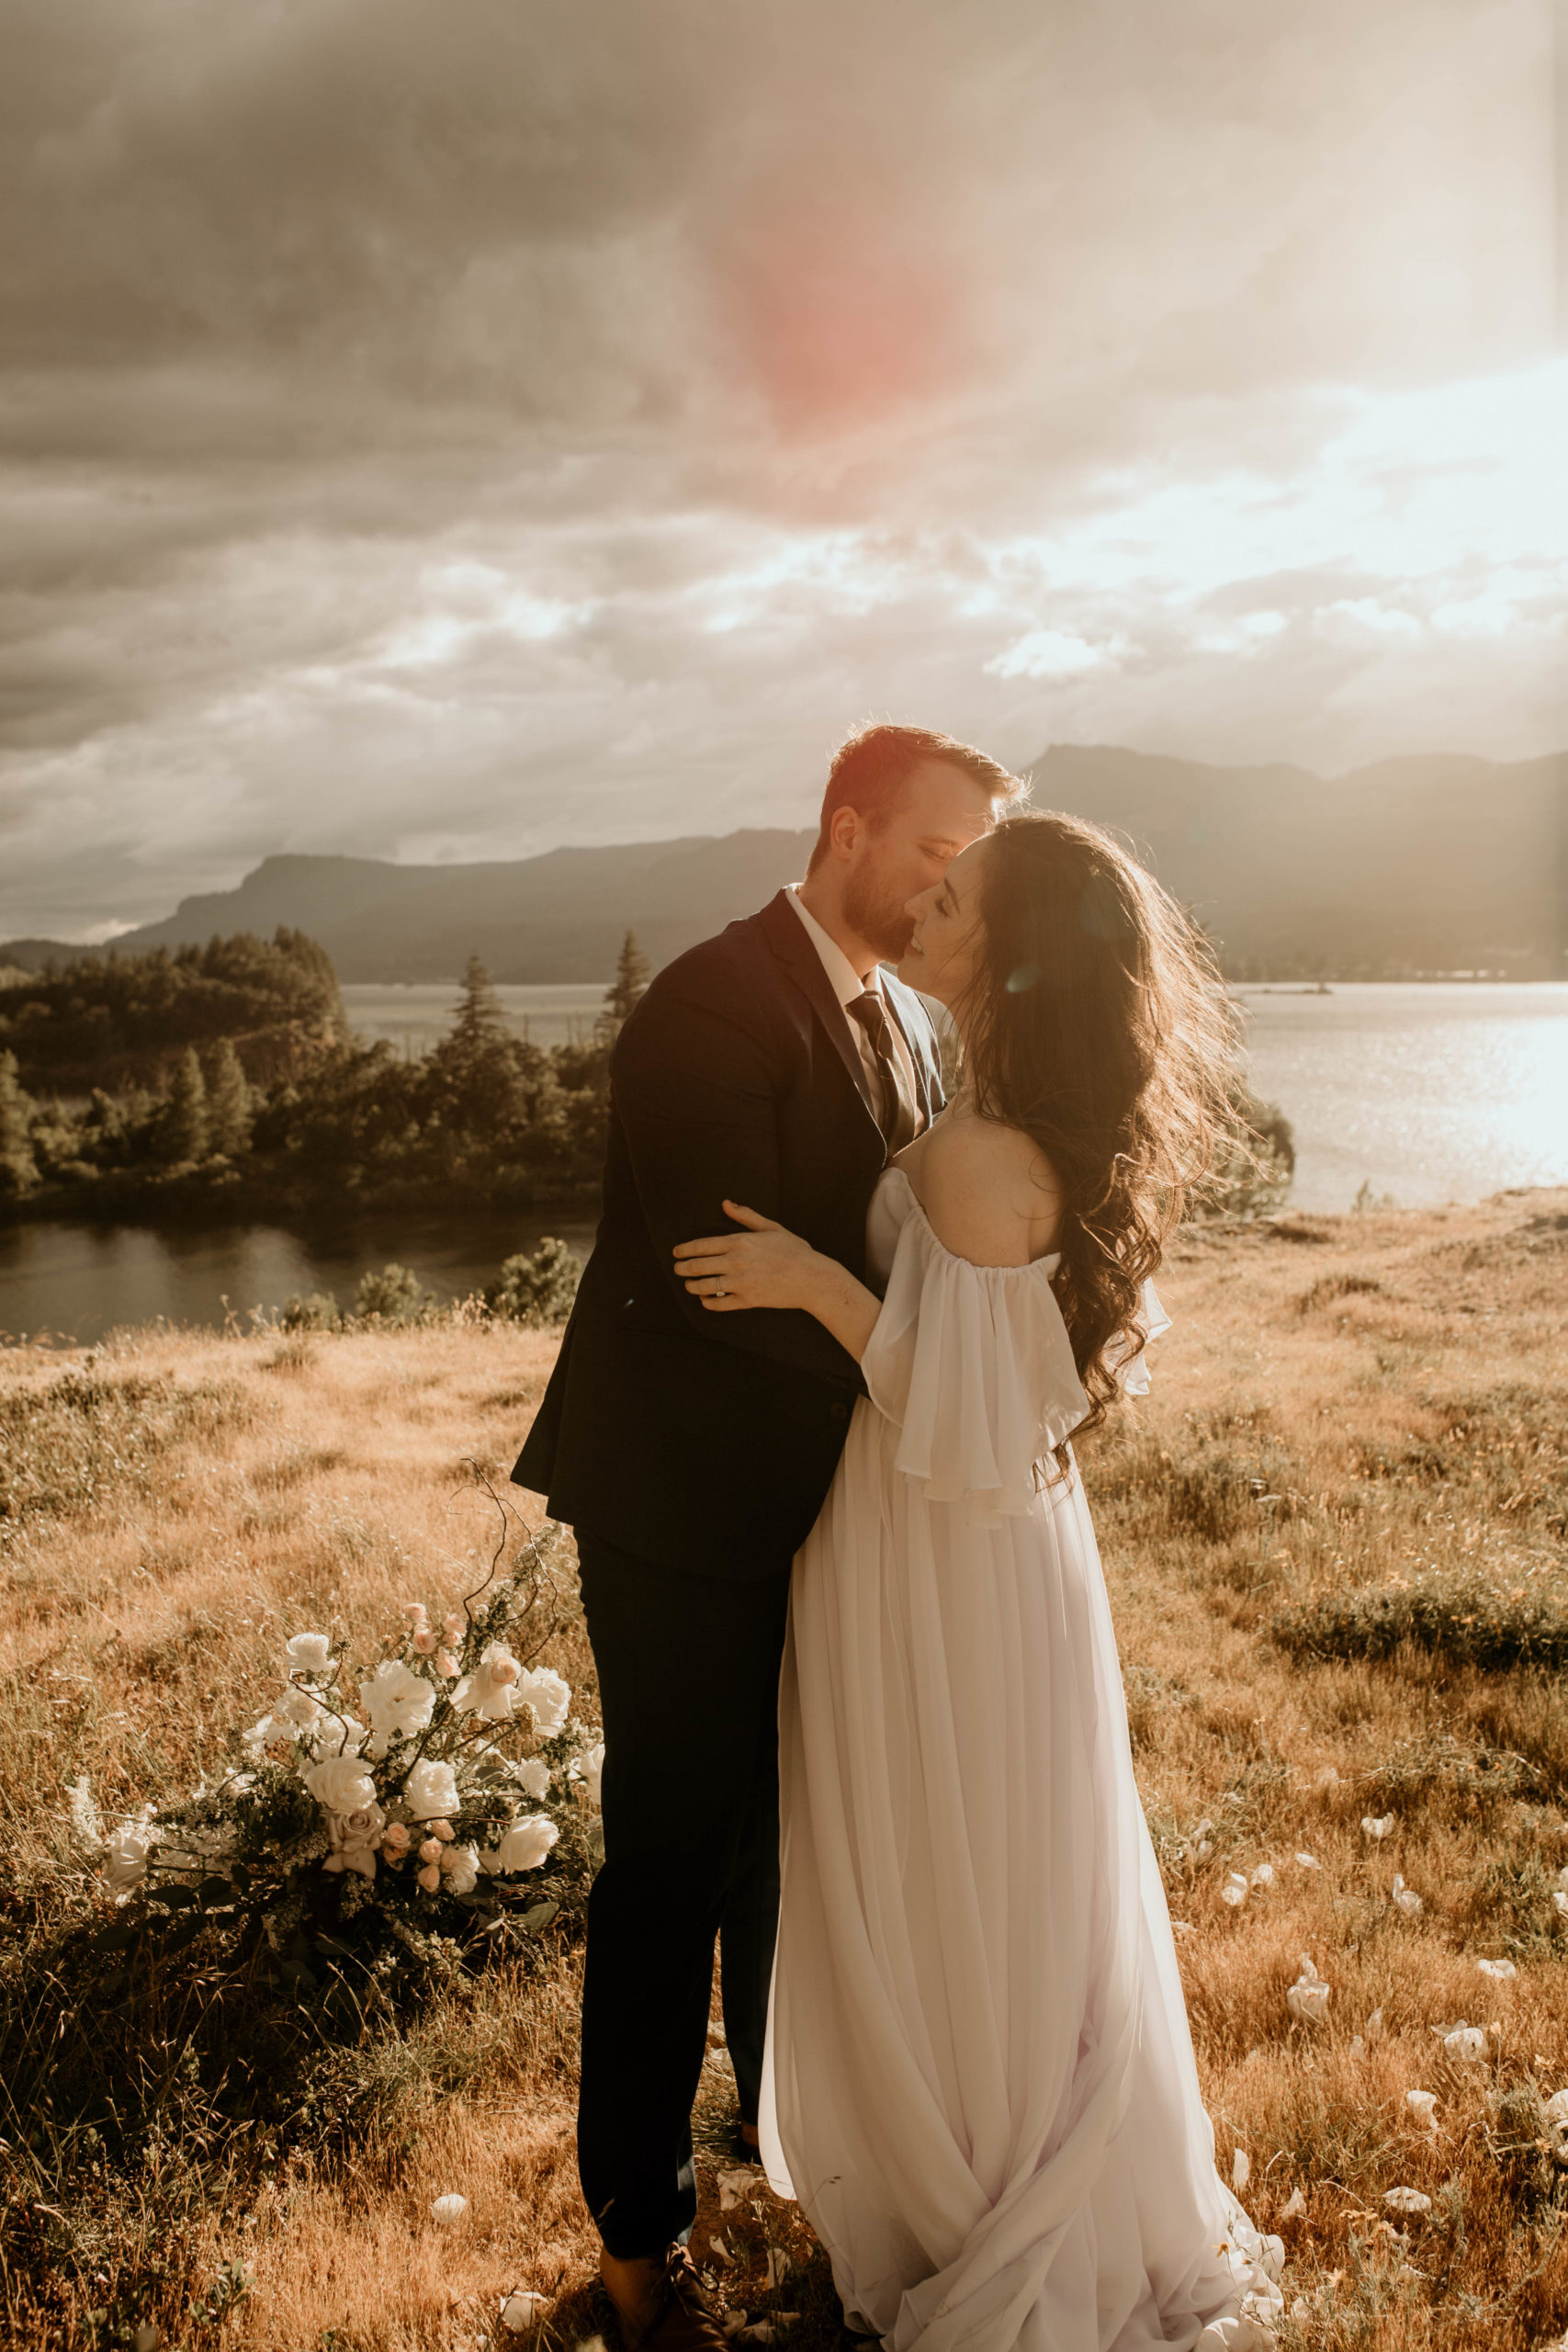 how to book your dream wedding photographer